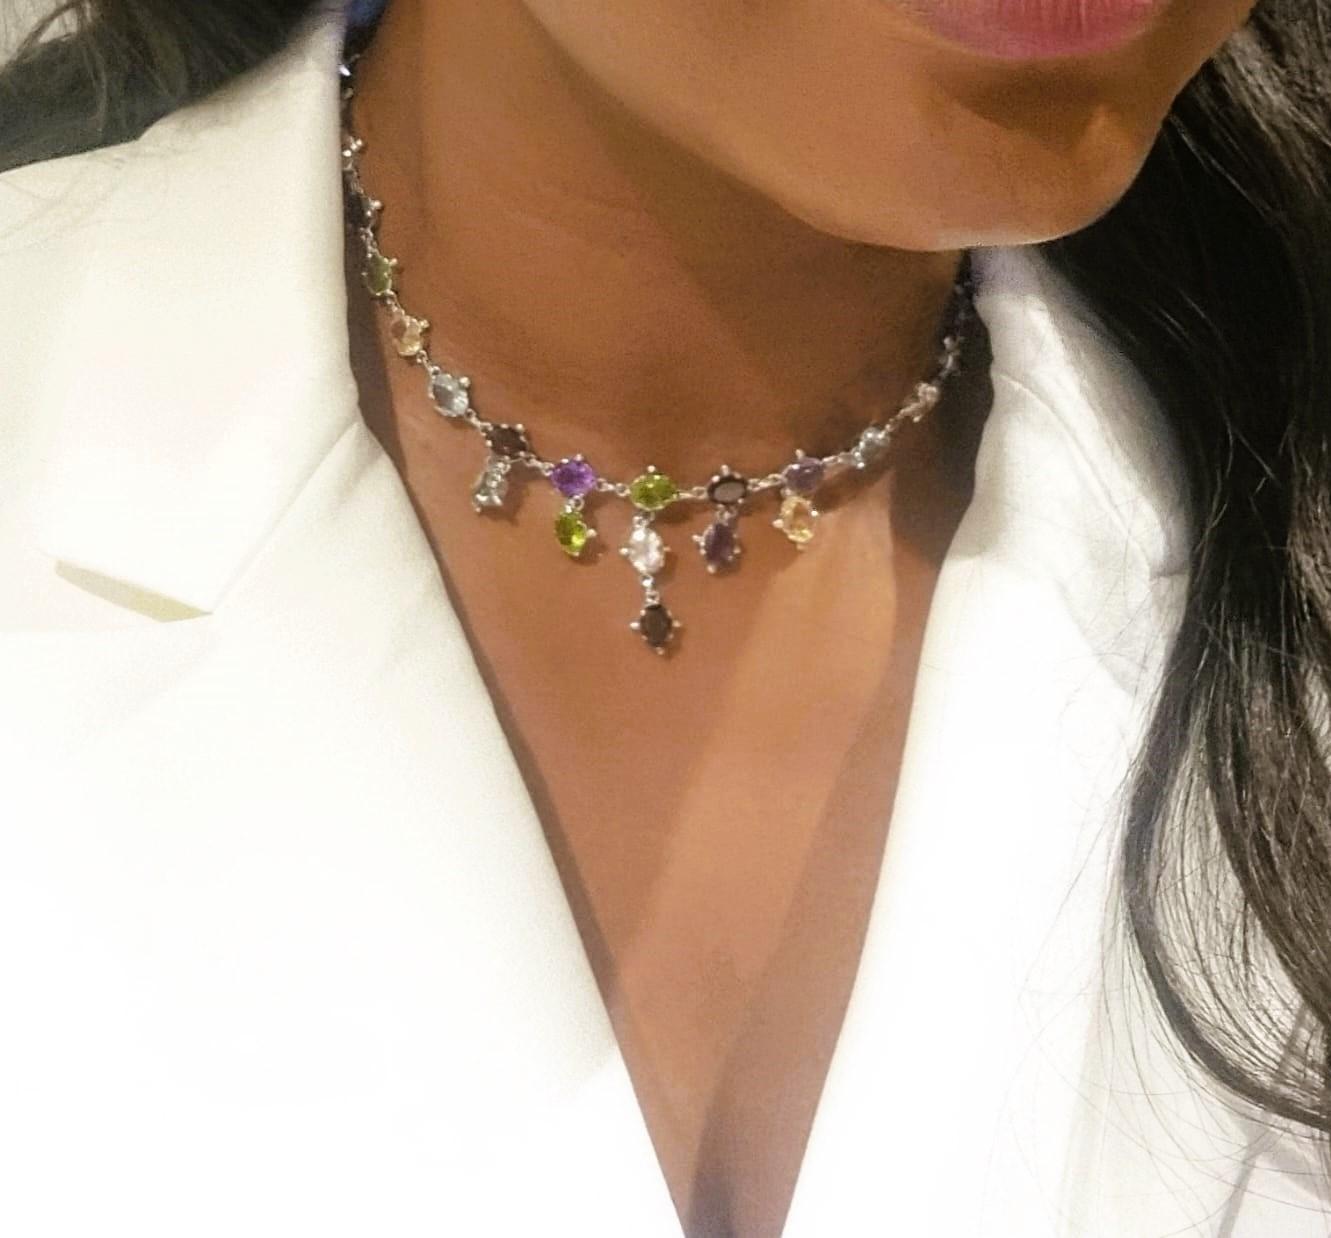 Introducing our extraordinary Mixed Gemstone Necklace, a true masterpiece of fine jewelry that showcases the enchanting beauty of five exquisite gemstones: Yellow Tourmaline, Peridot, Garnet, Topaz, and Amethyst. This necklace features a total of